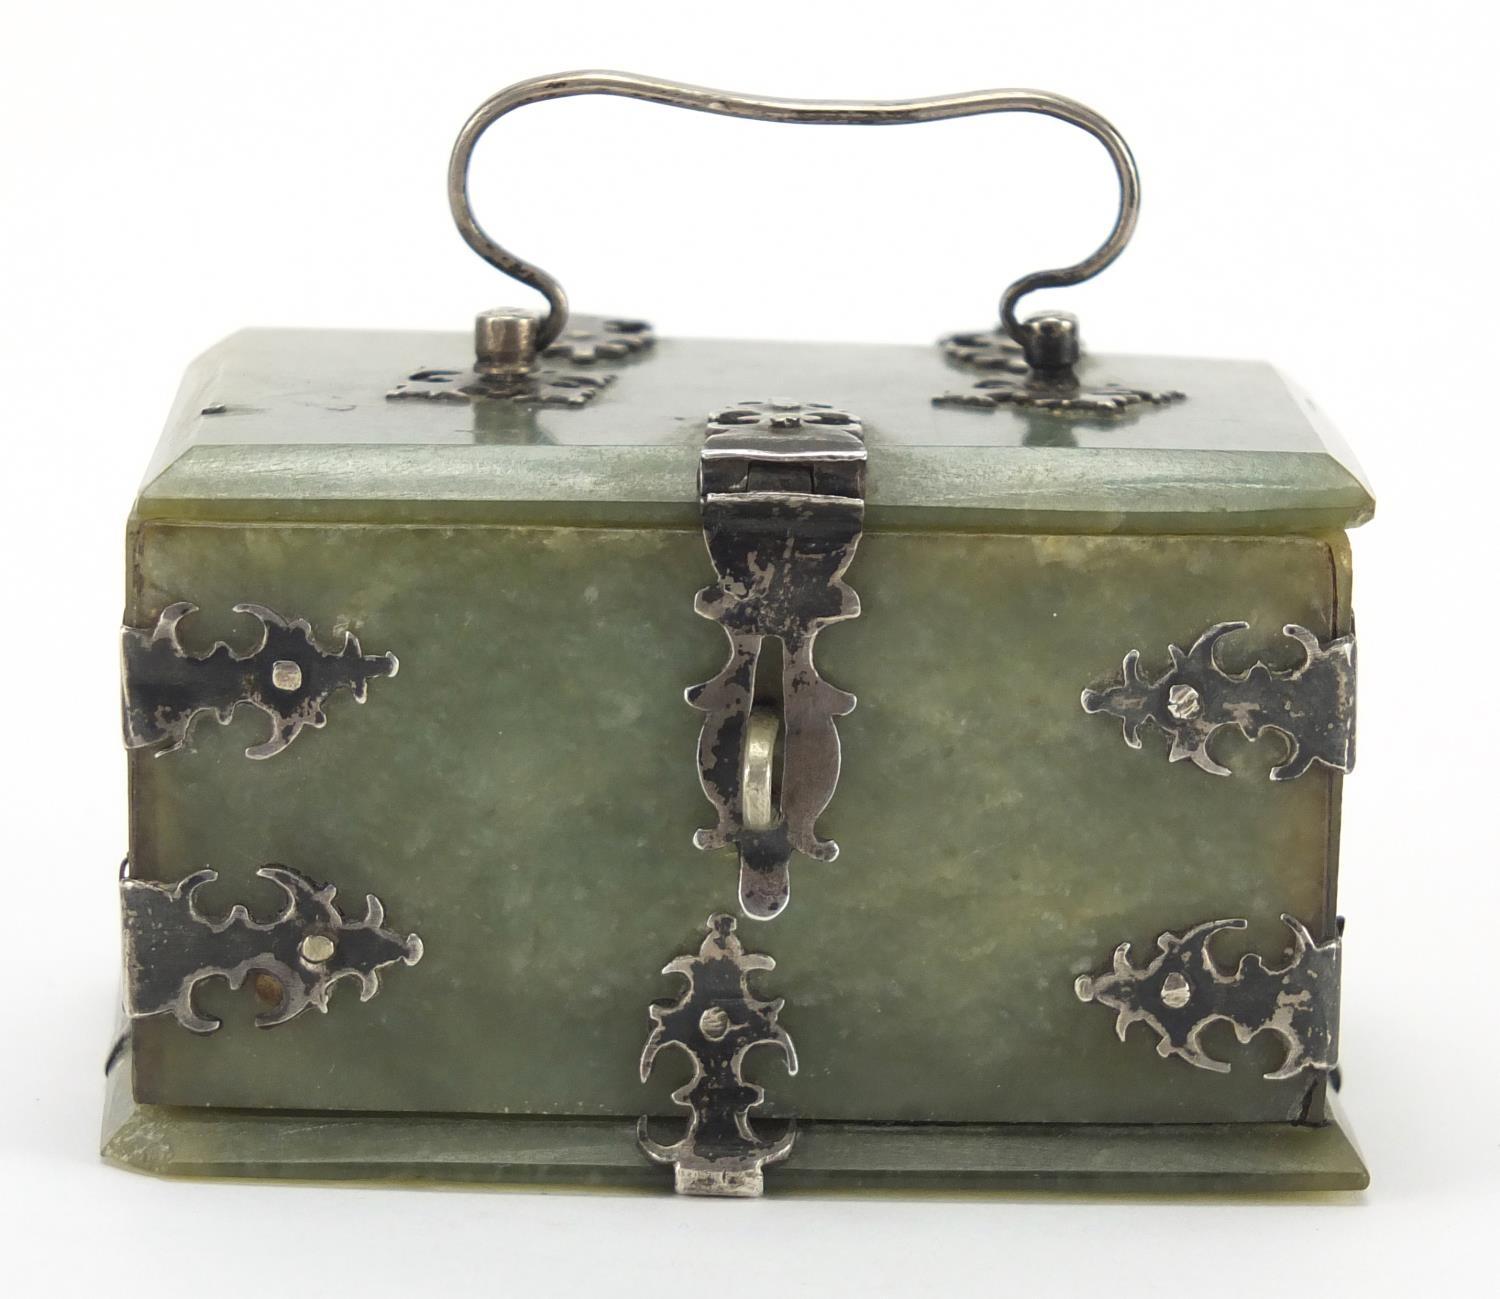 19th century Indian Mughal green jade casket, with silver mounts and swing handle, 5cm H x 9cm W x - Image 3 of 8